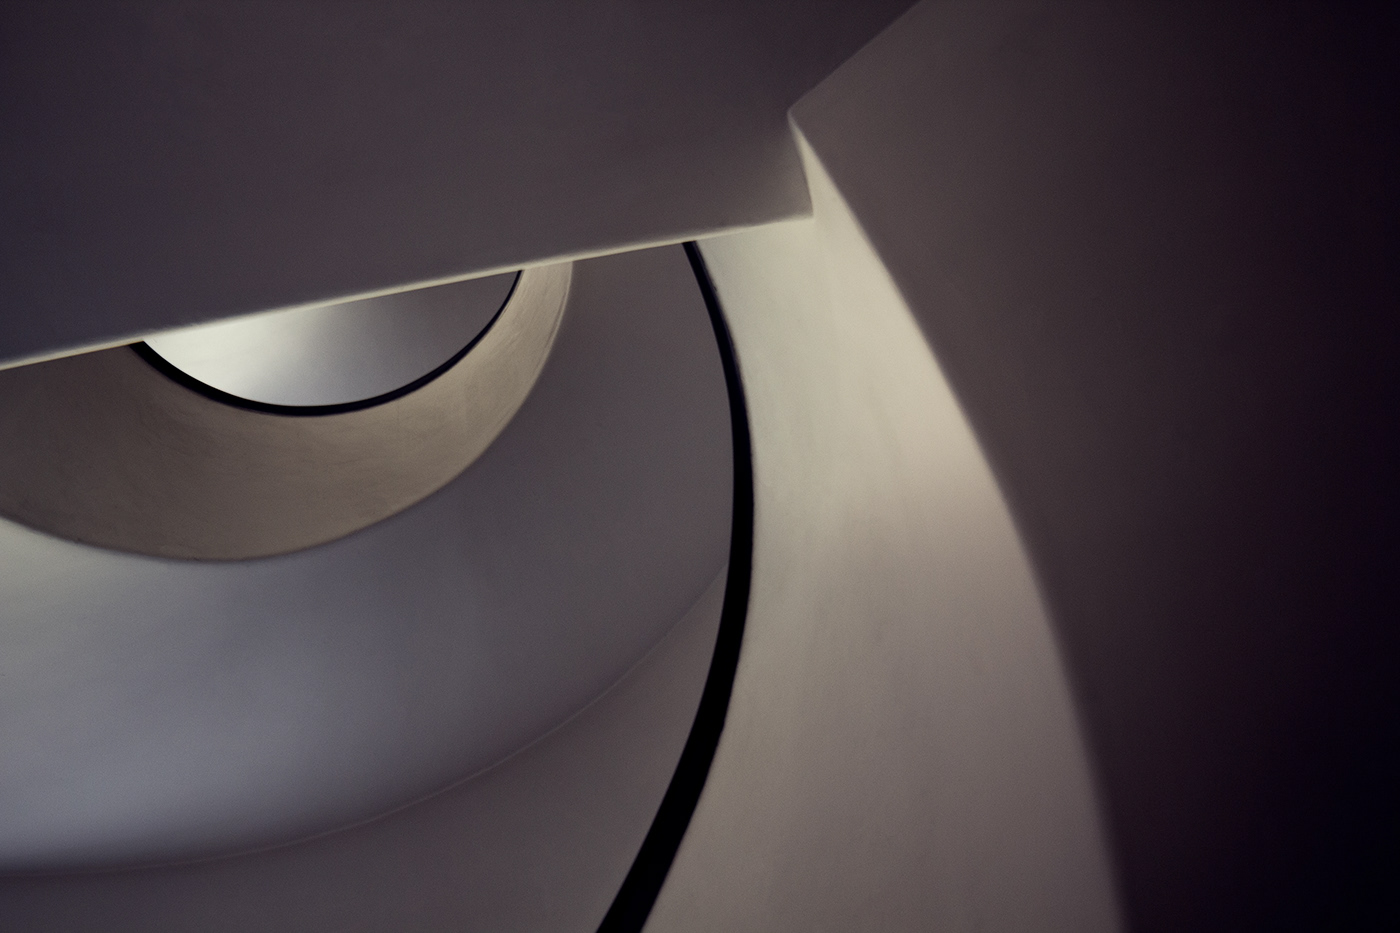 armony curves and lines environment photography Interior Photography kandinsky kandinsky inspiration light and shadow stairs stairway Stairwell